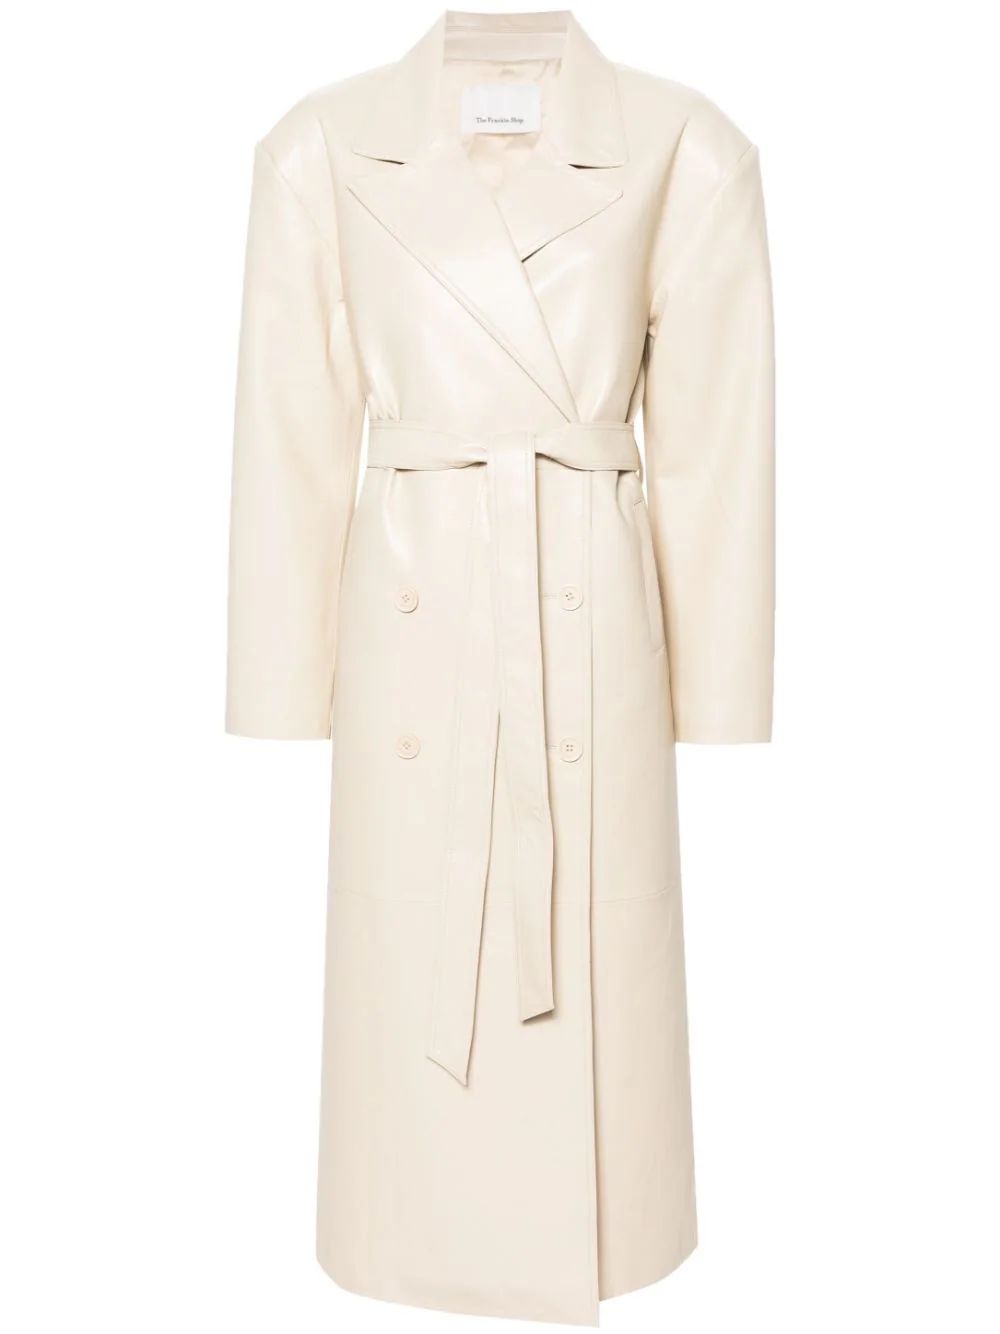 The Frankie Shop Tina double-breasted Trench Coat - Farfetch | Farfetch Global